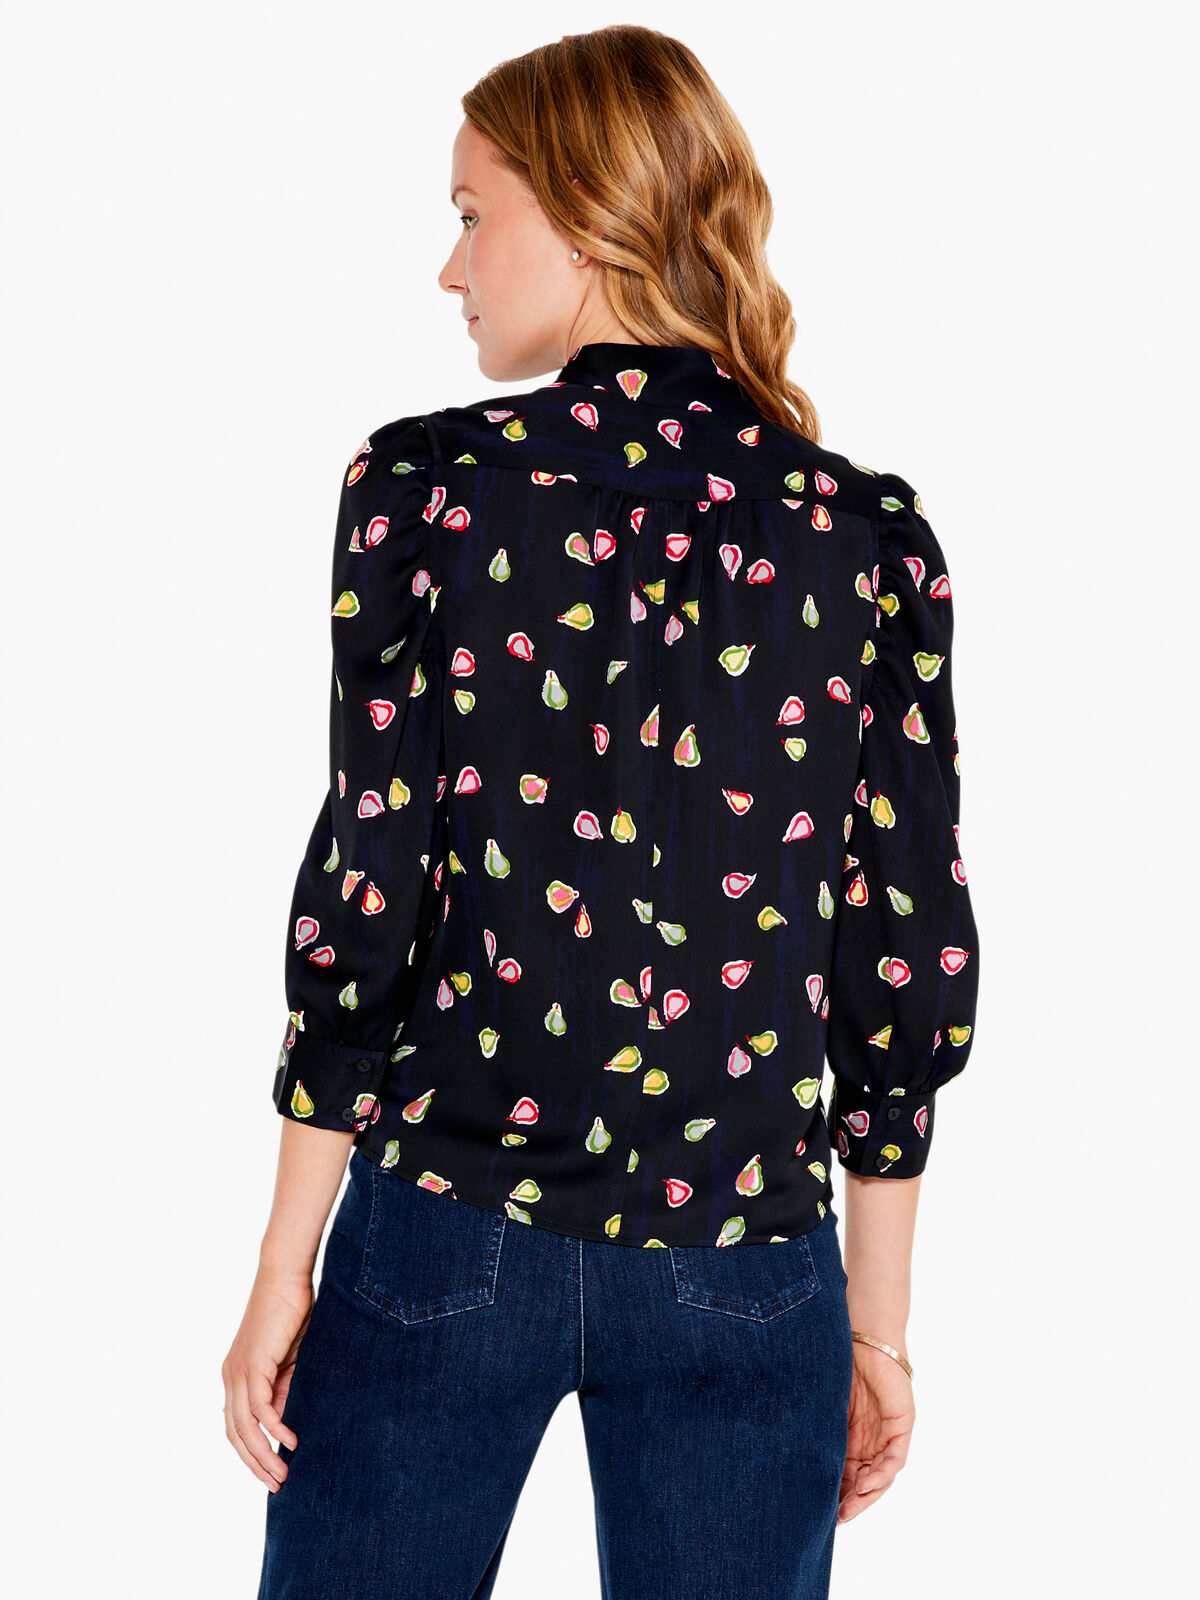 Party Pears Top